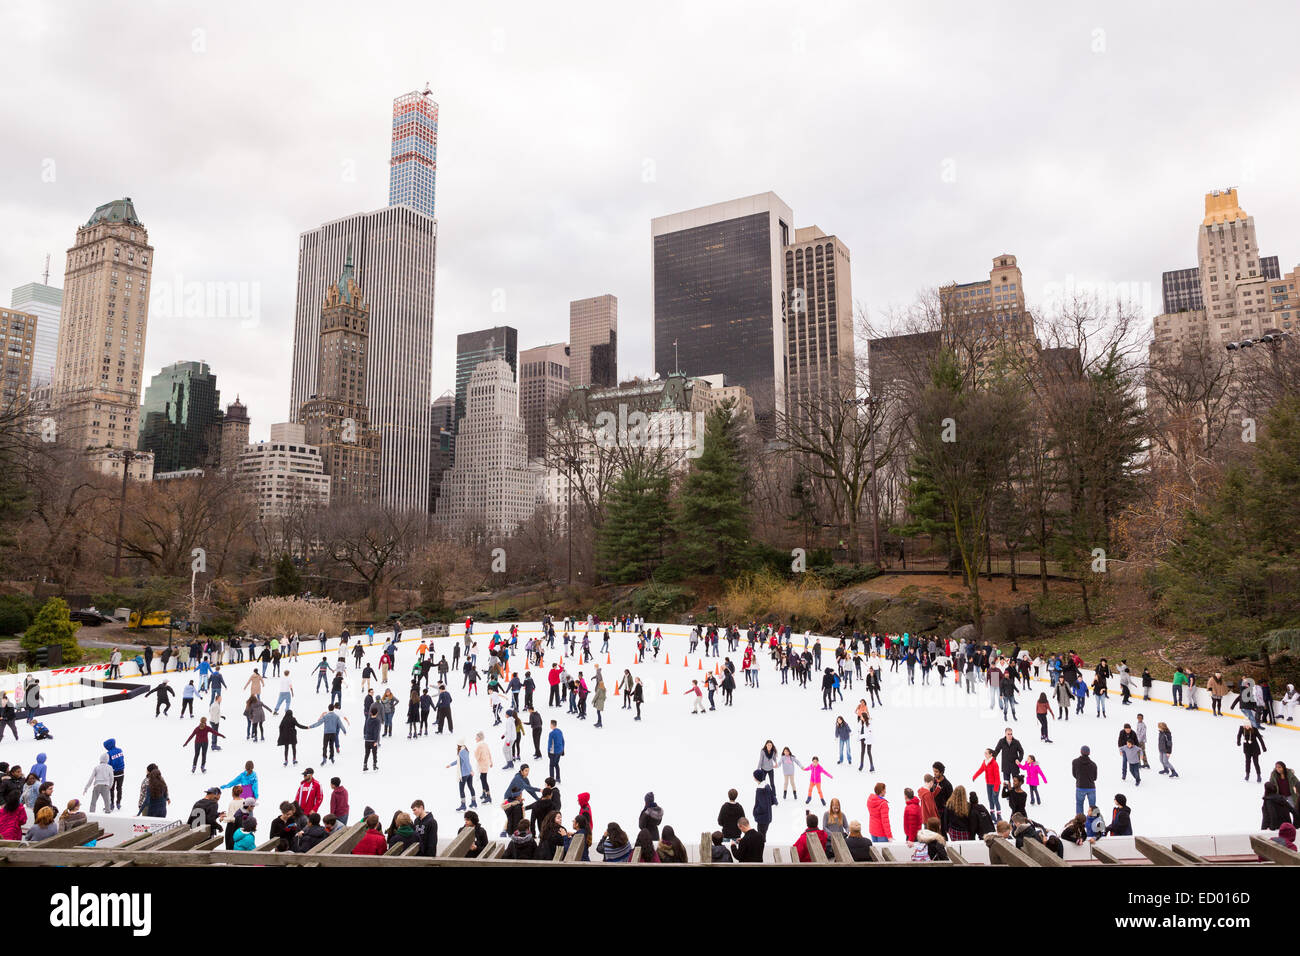 Ice skaters at the Christmas holiday Trump - Wollman Rink in Central Park December 17, 2014 in New York City, NY. Stock Photo